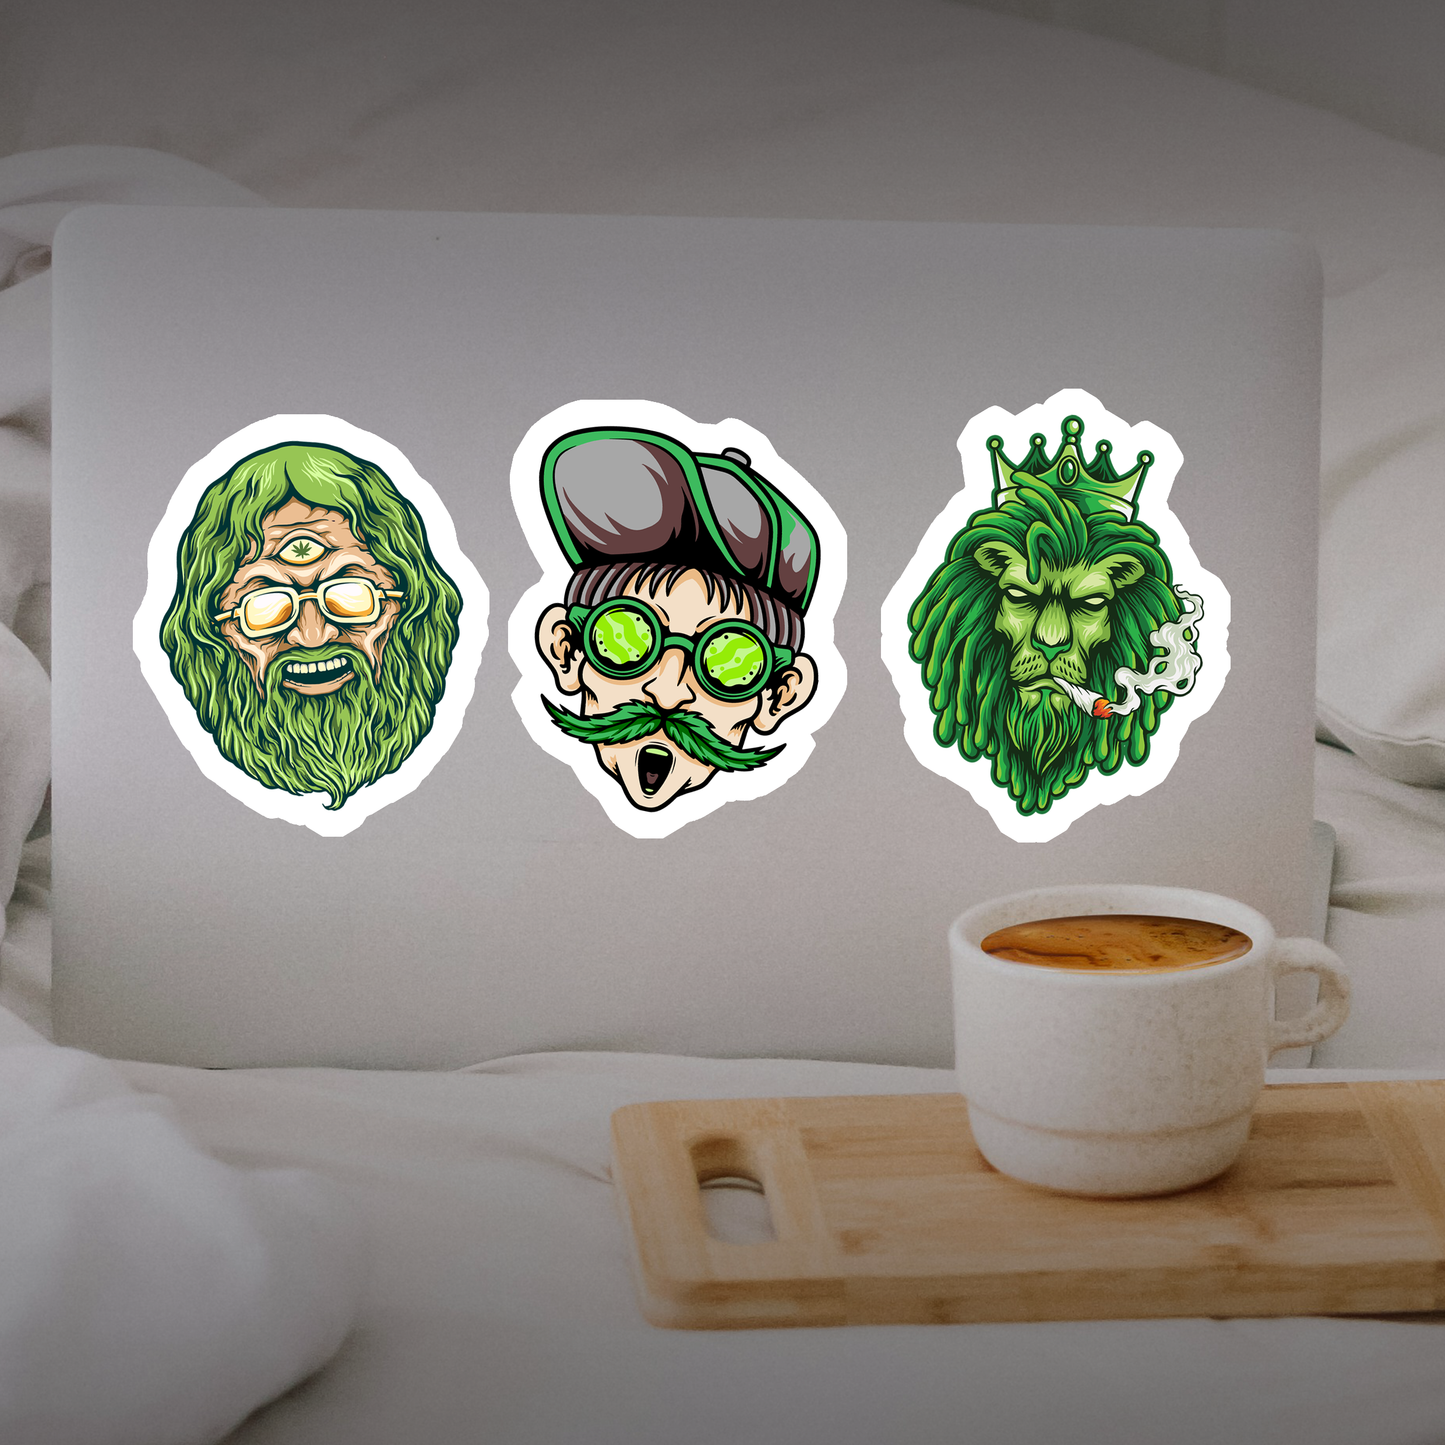 Large Cannabis Character Vinyl Stickers